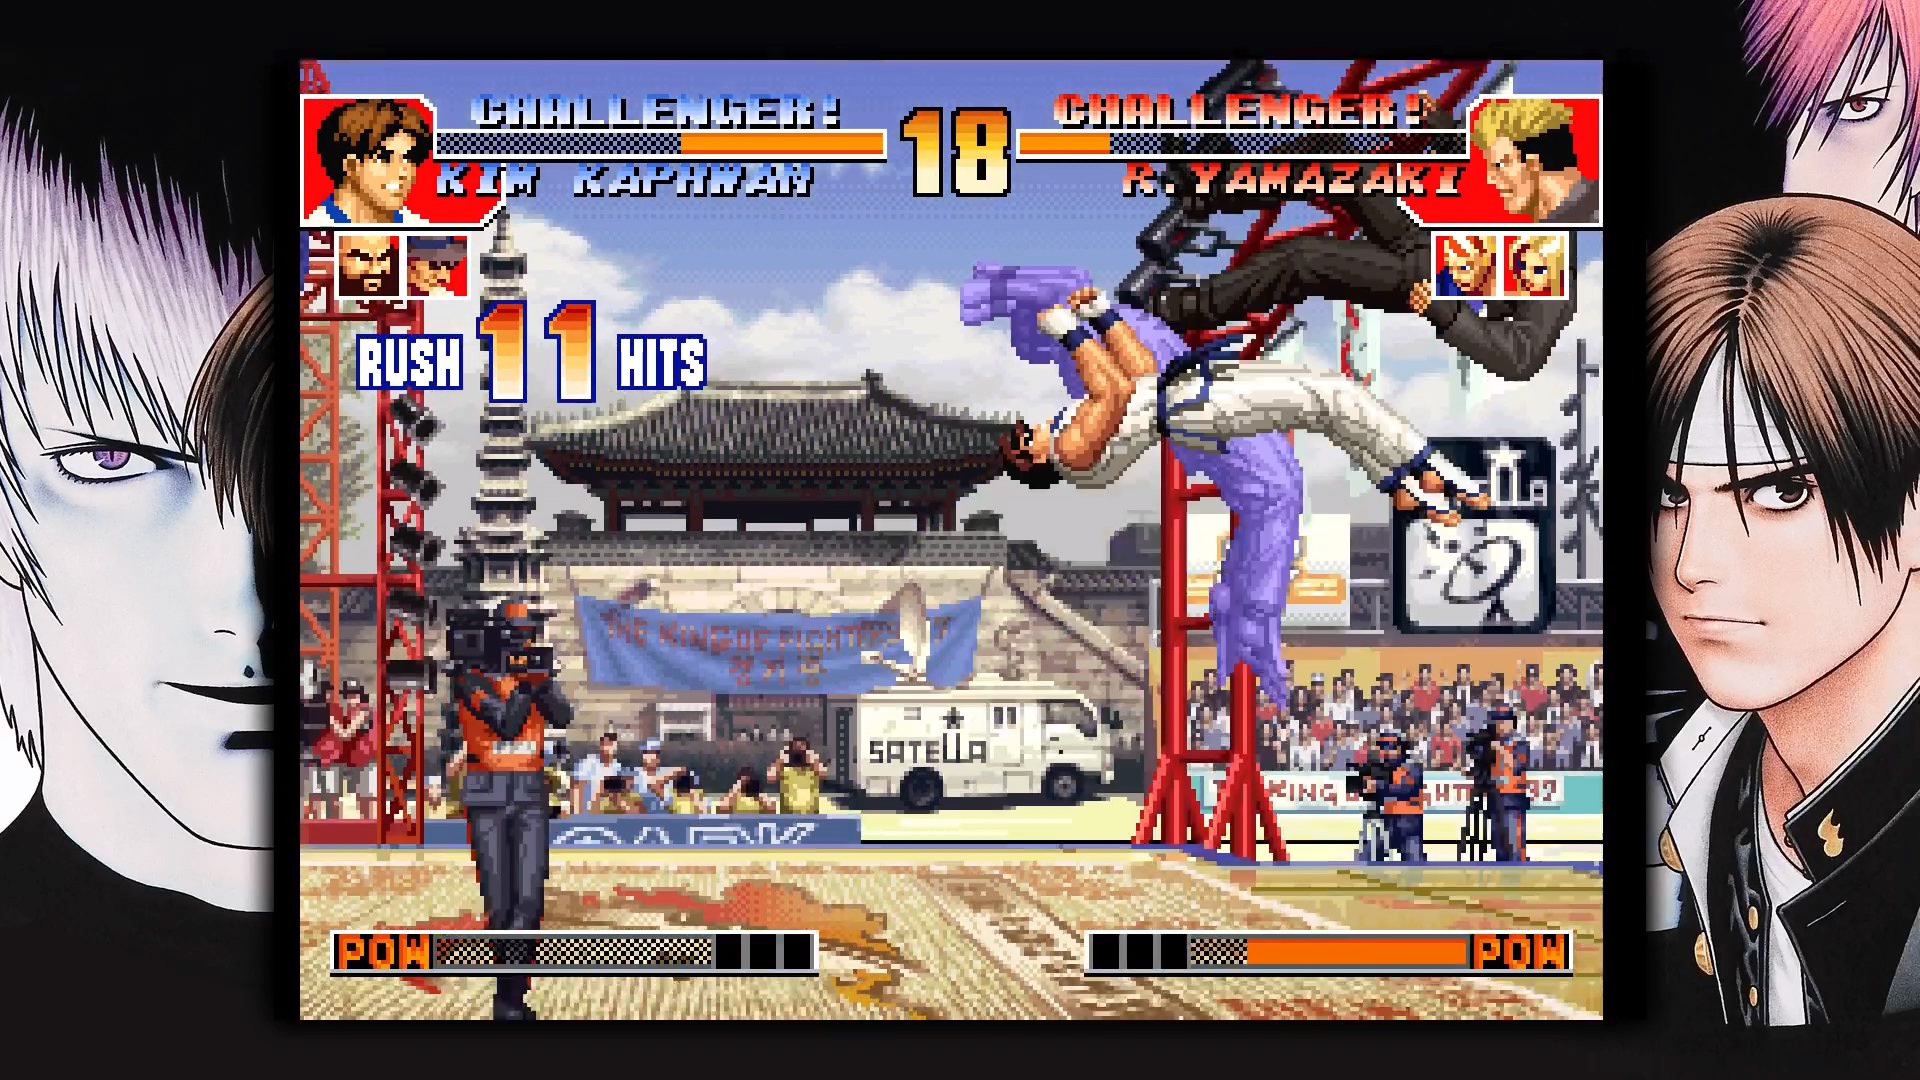 the king of fighters pc